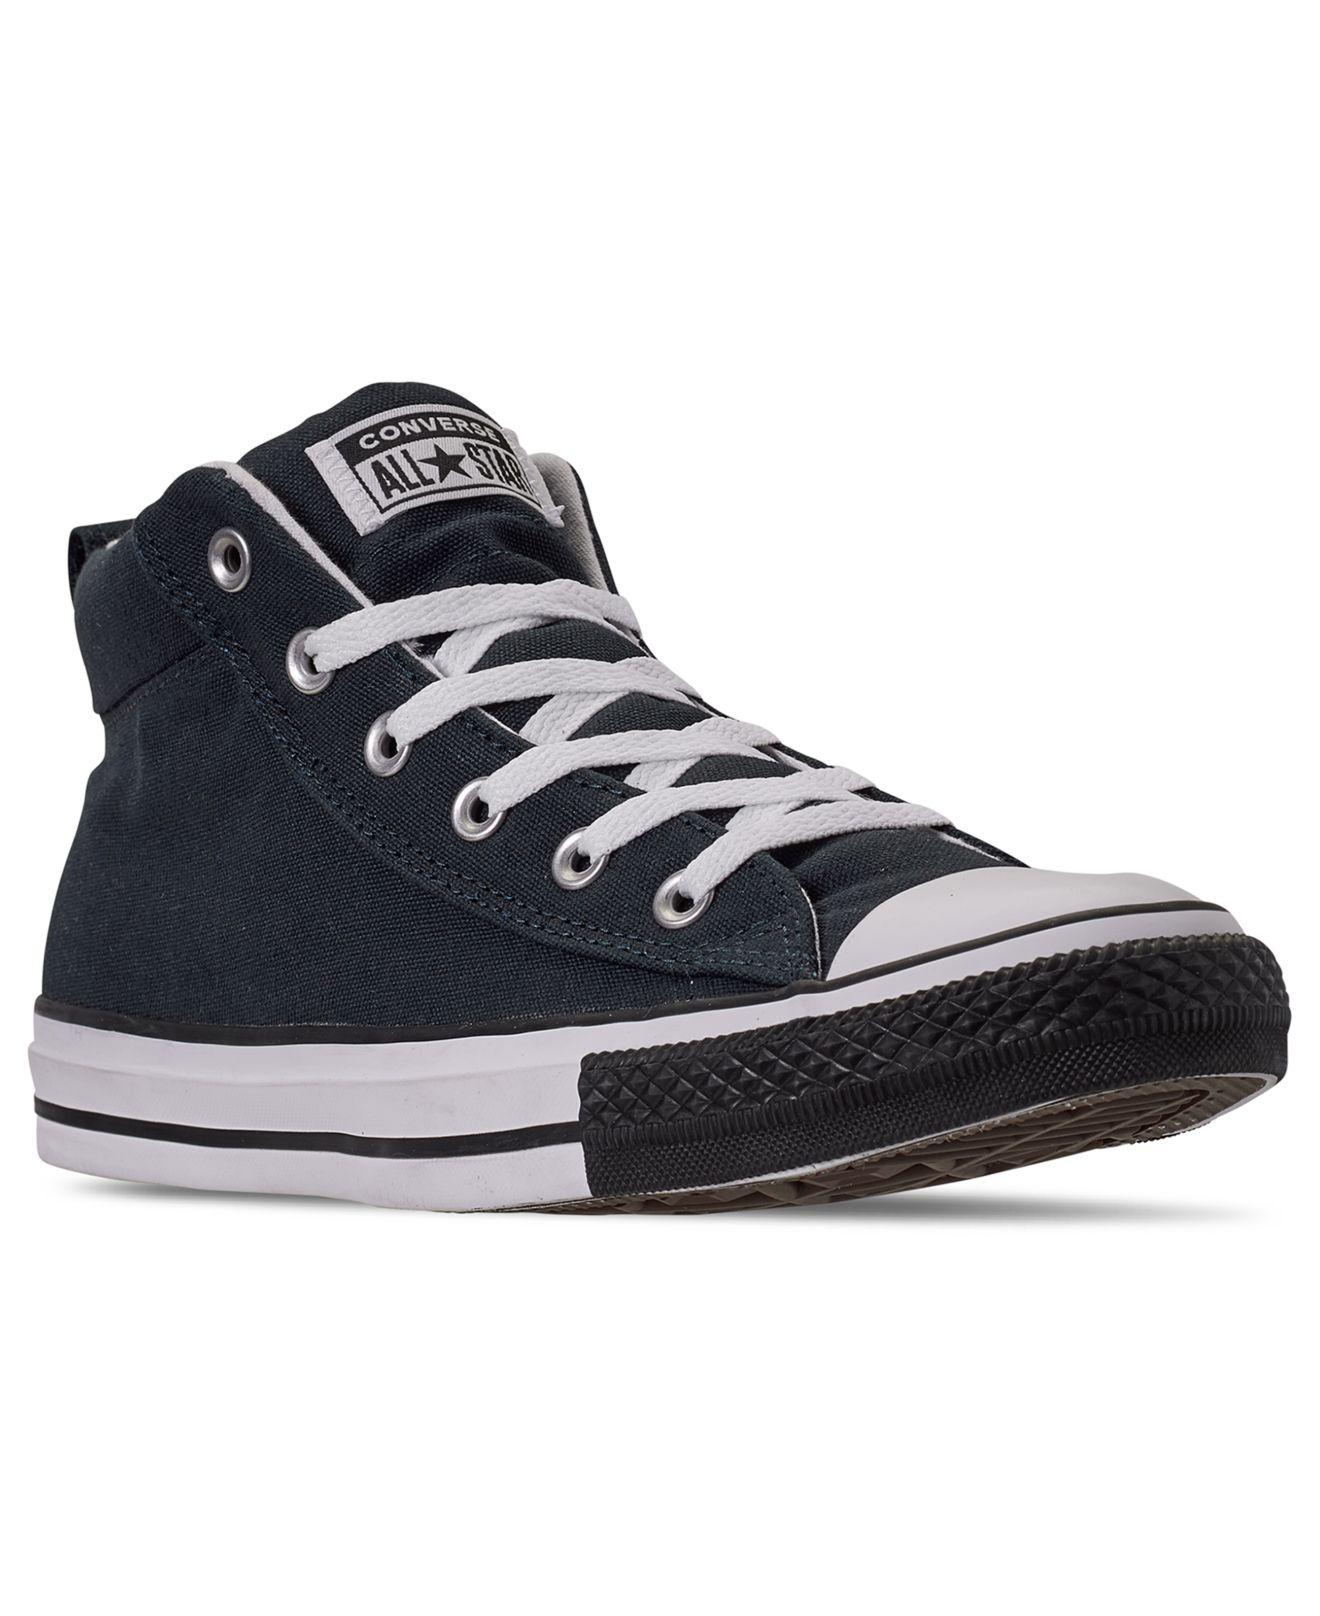 Converse Chuck Taylor Street Mid Black Toe Casual Sneakers From Finish Line for Men Lyst